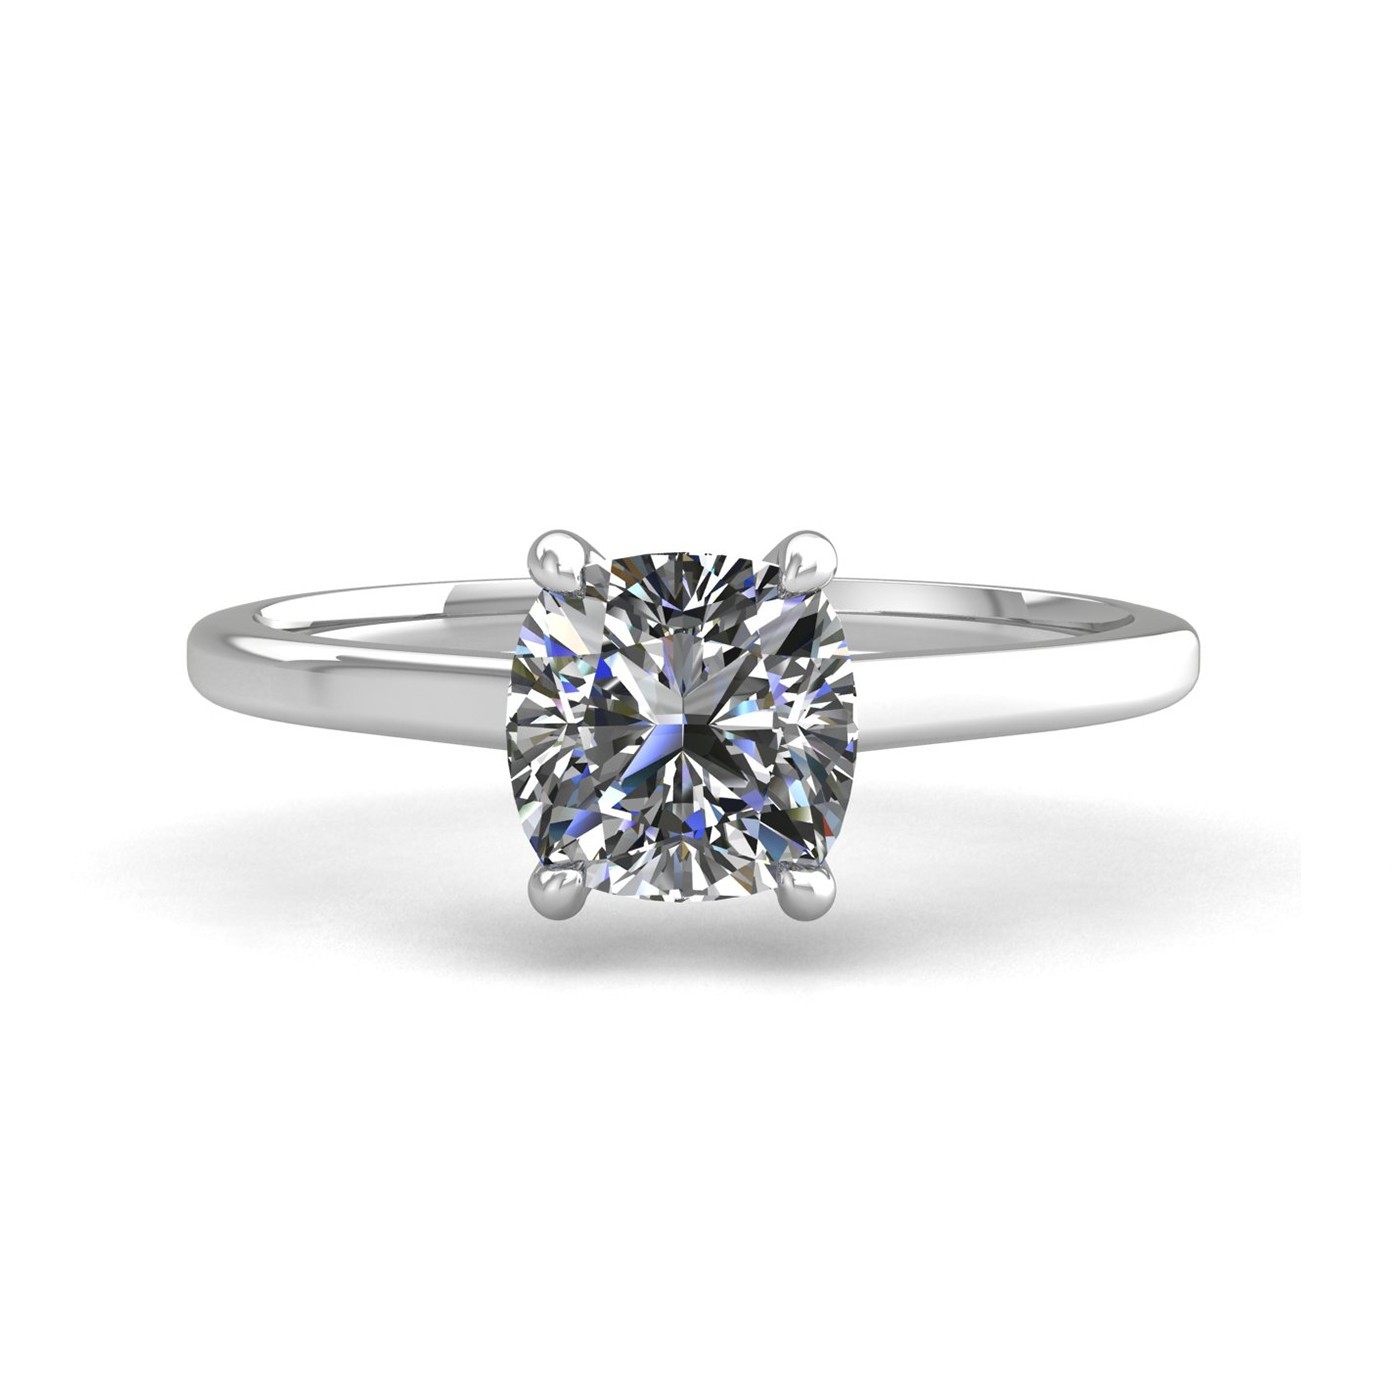 18k white gold 1.0ct 4 prongs solitaire cushion cut diamond engagement ring with whisper thin band Photos & images